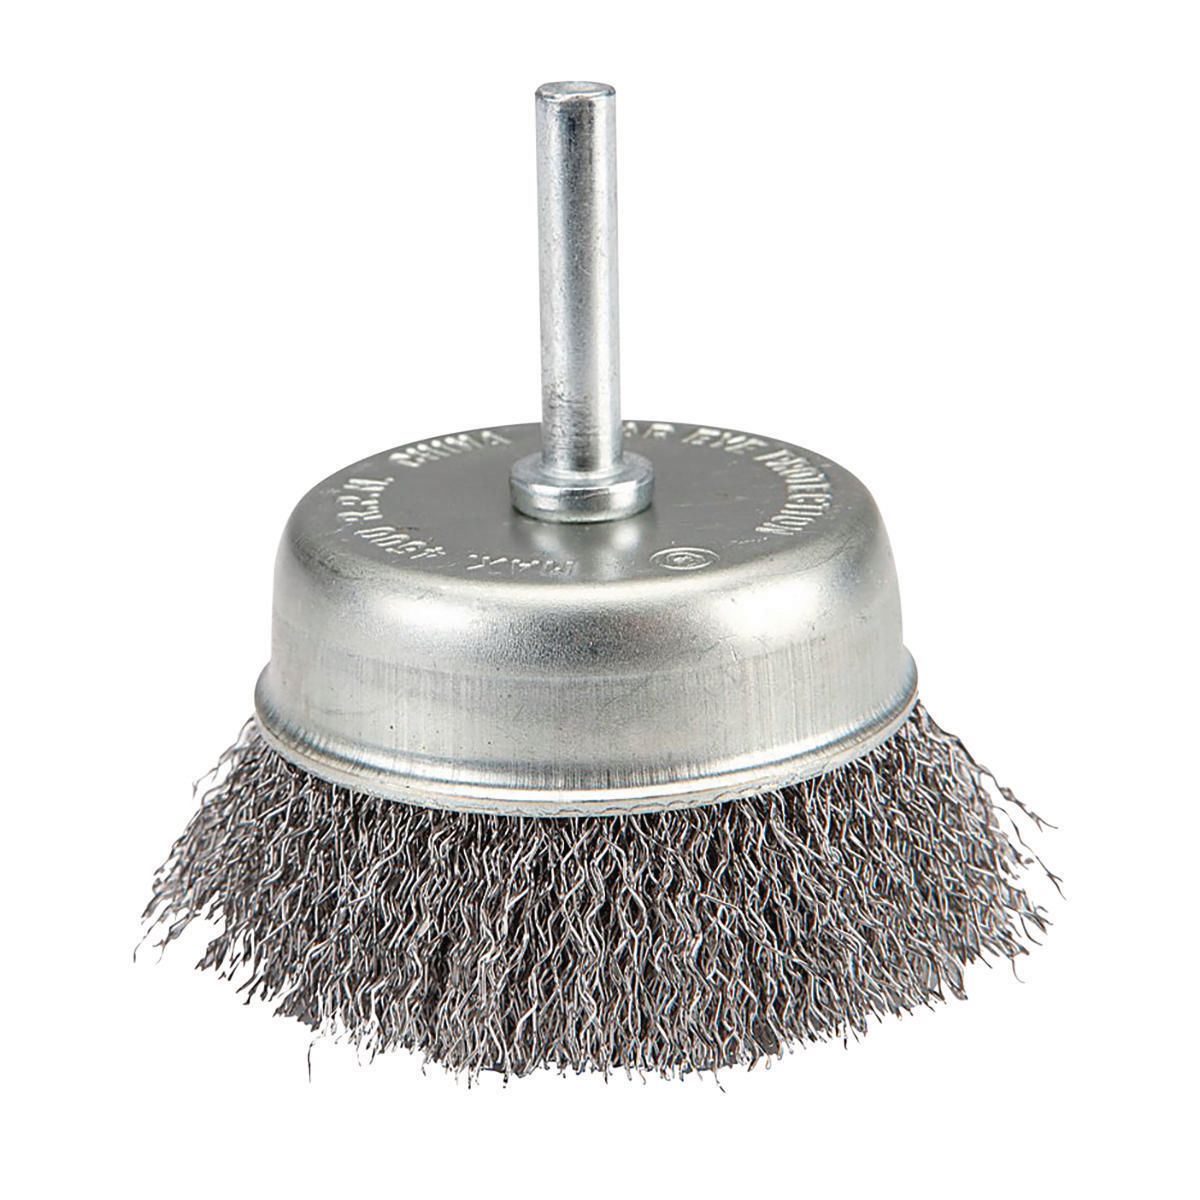 WARRIOR 3 in. Wire Cup Brush with 1/4 in. Shank - Item 60320 / 42857